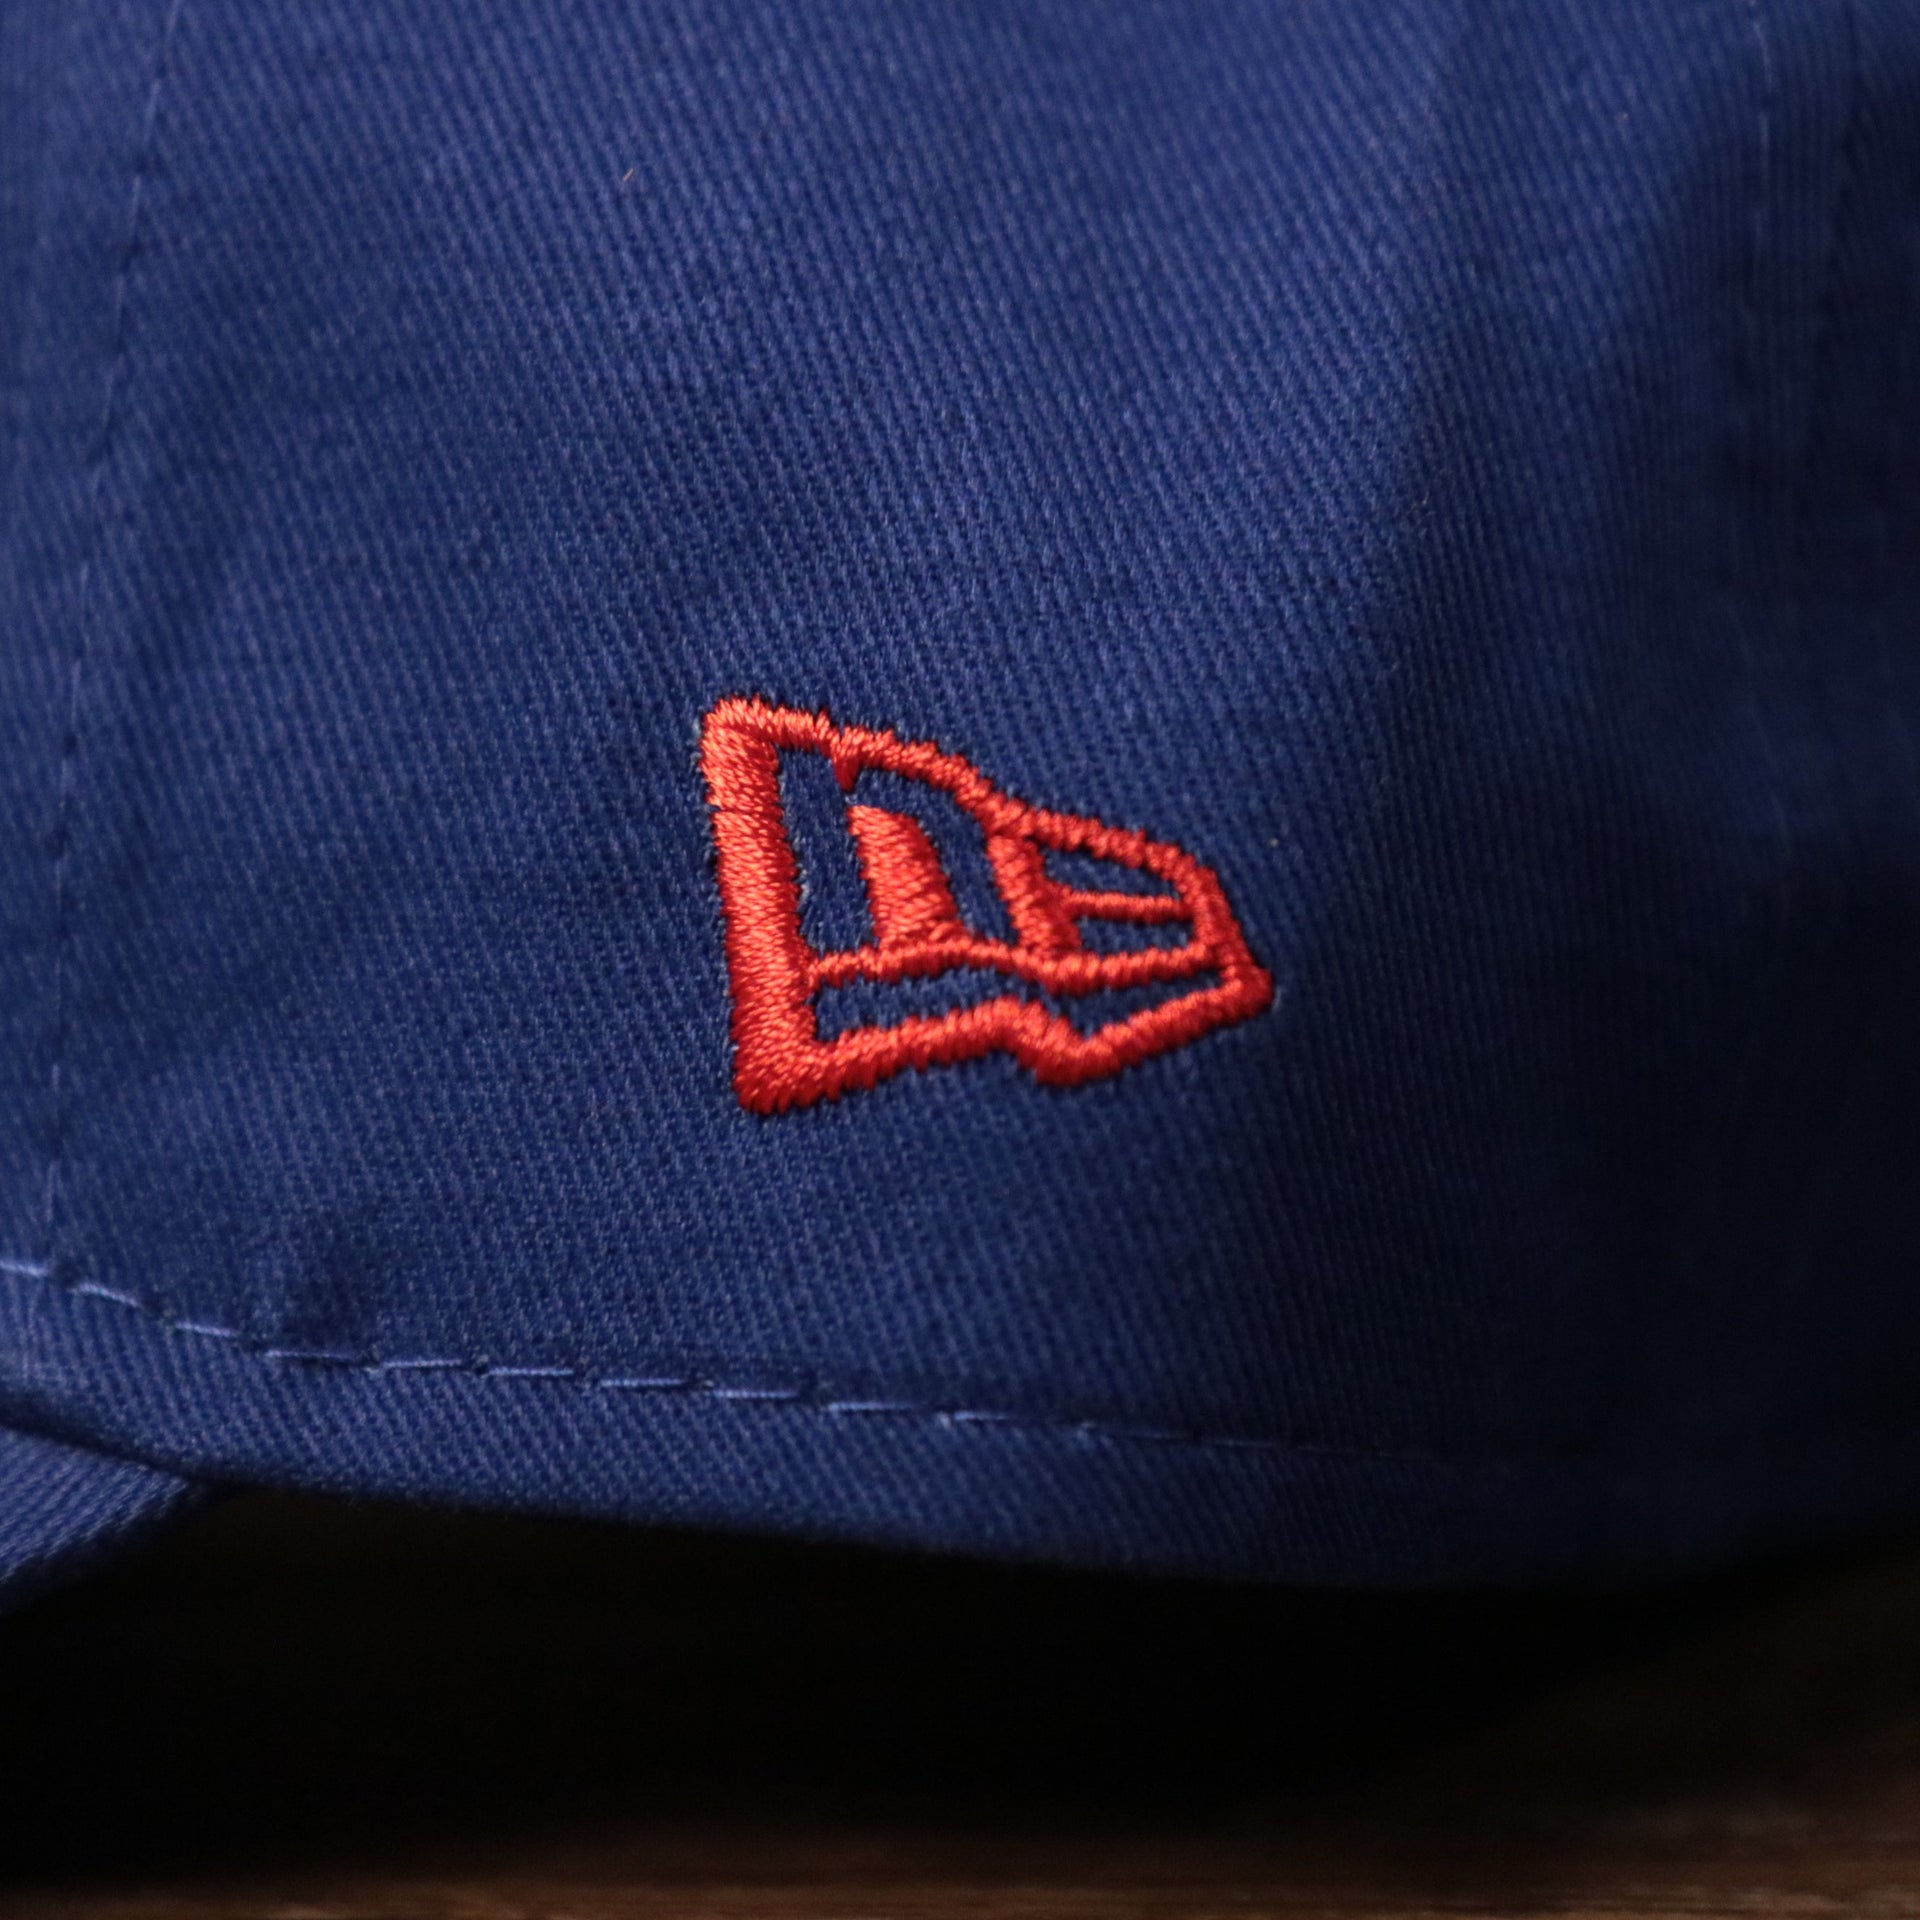 The New Era patch on the left side of the Philadelphia 76ers infant ball cap.